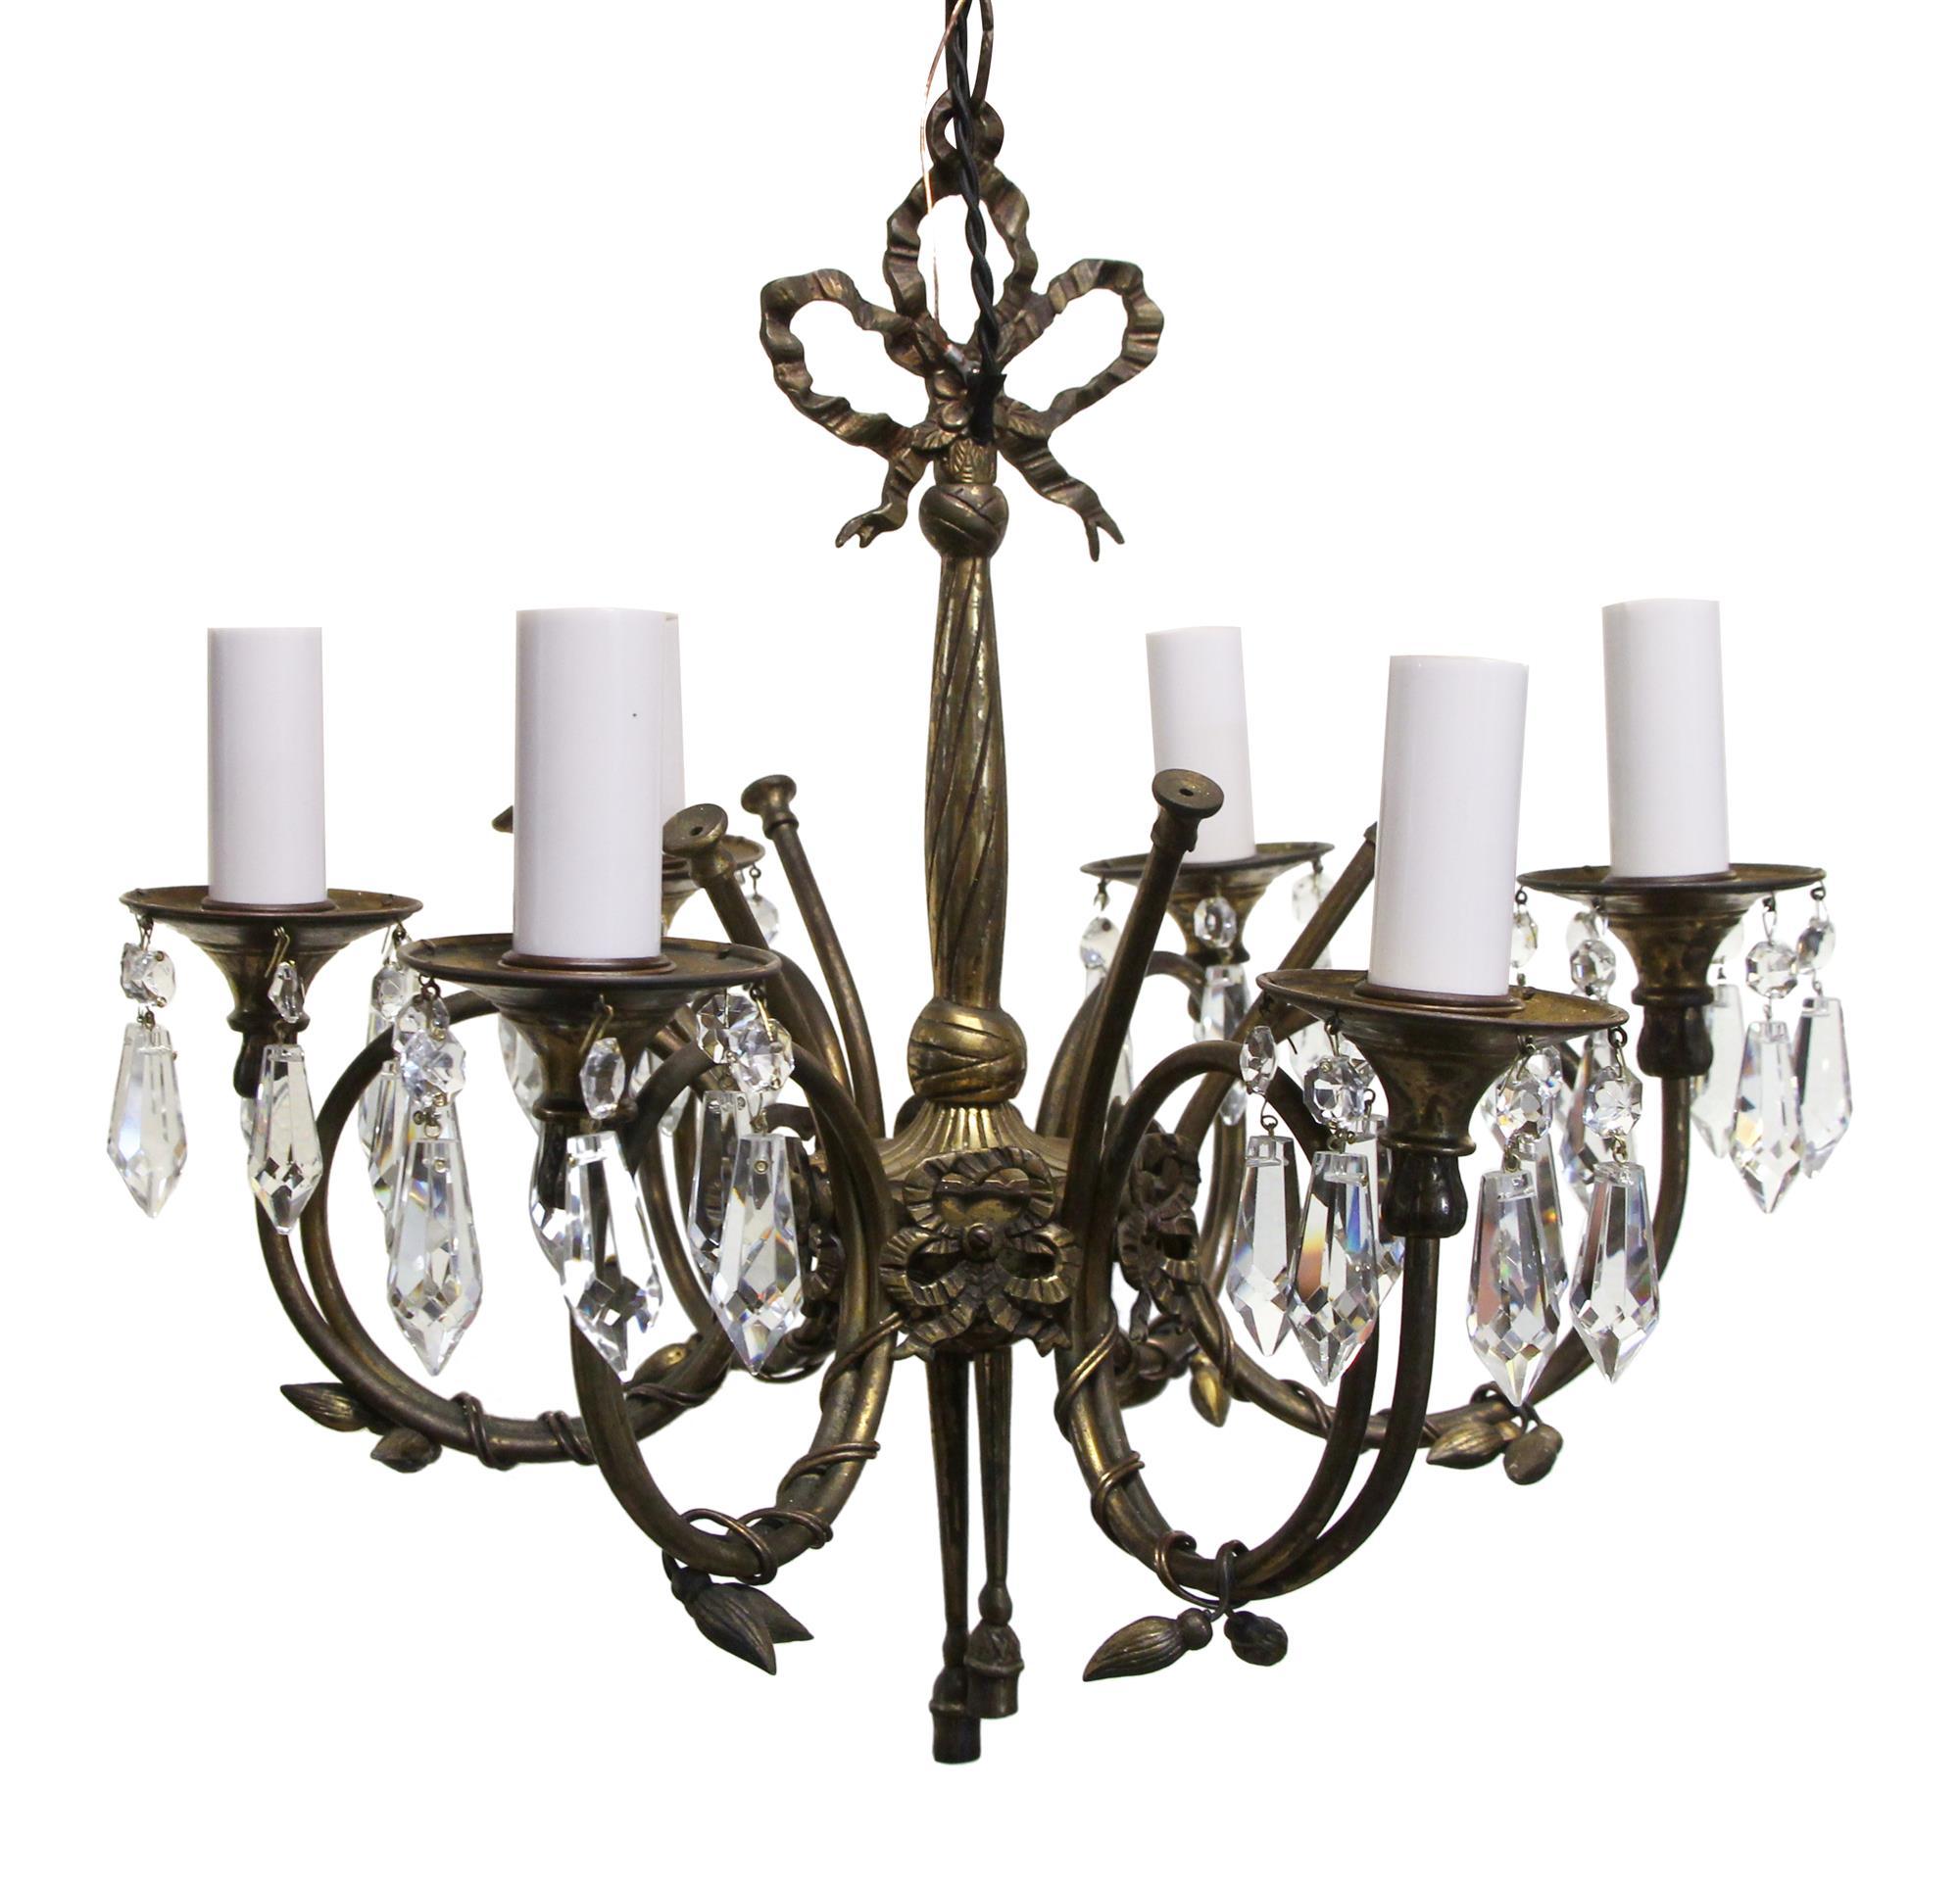 1950s delicate and petite Spanish bronze six candlestick arm chandelier with pretty leaf and ribbon details and beautiful crystals. This can be seen at our 2420 Broadway location on the upper west side in Manhattan.